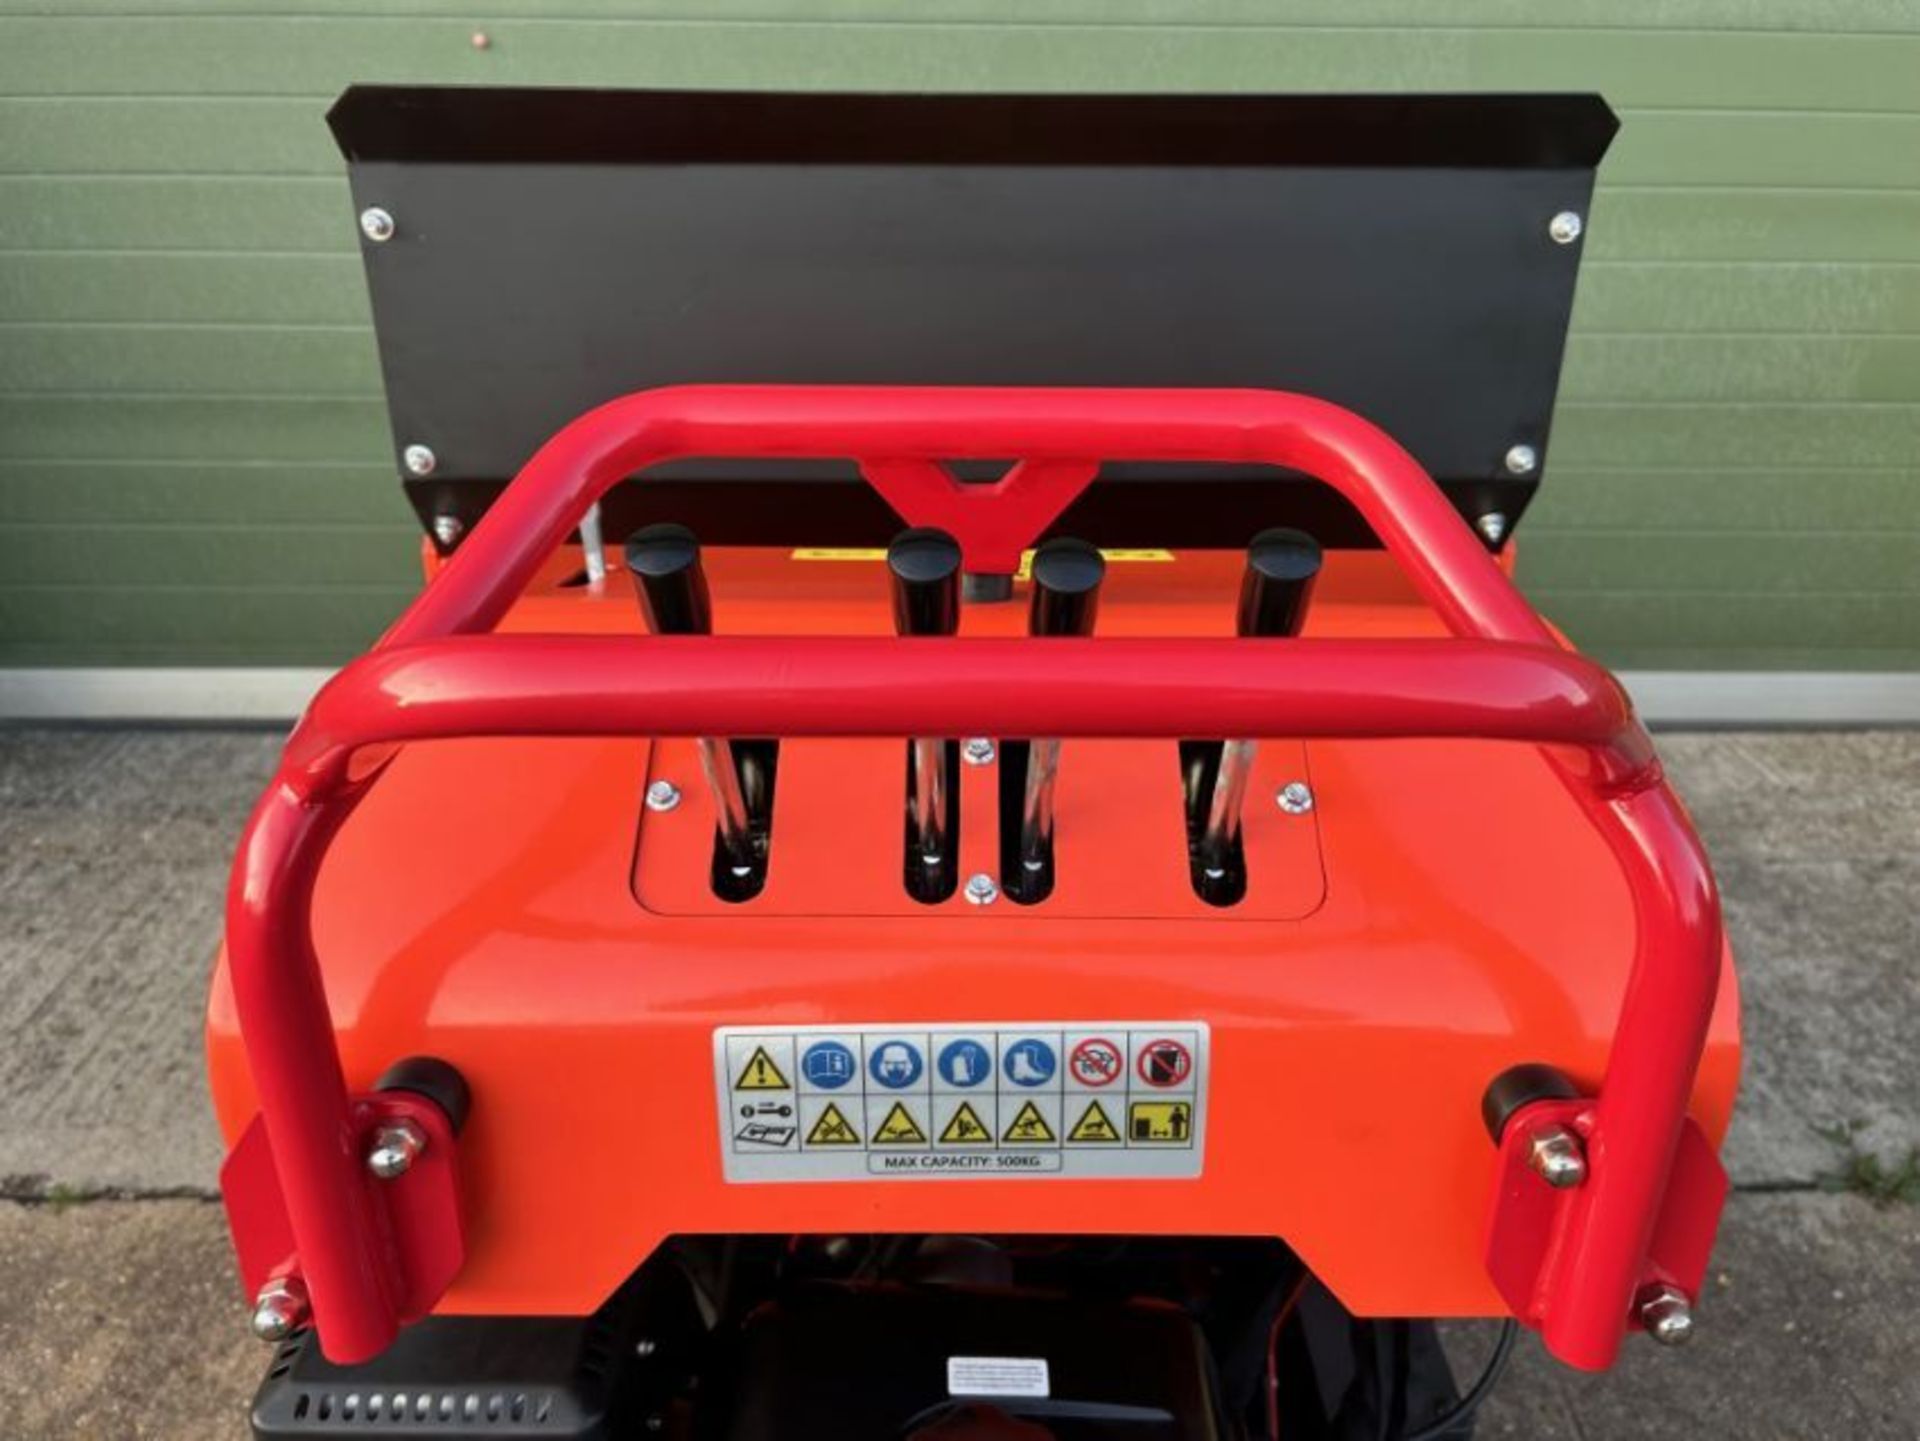 New and unused Armstrong DR-MD-150PRO Self-Loading Tracked Dumper - Image 20 of 21